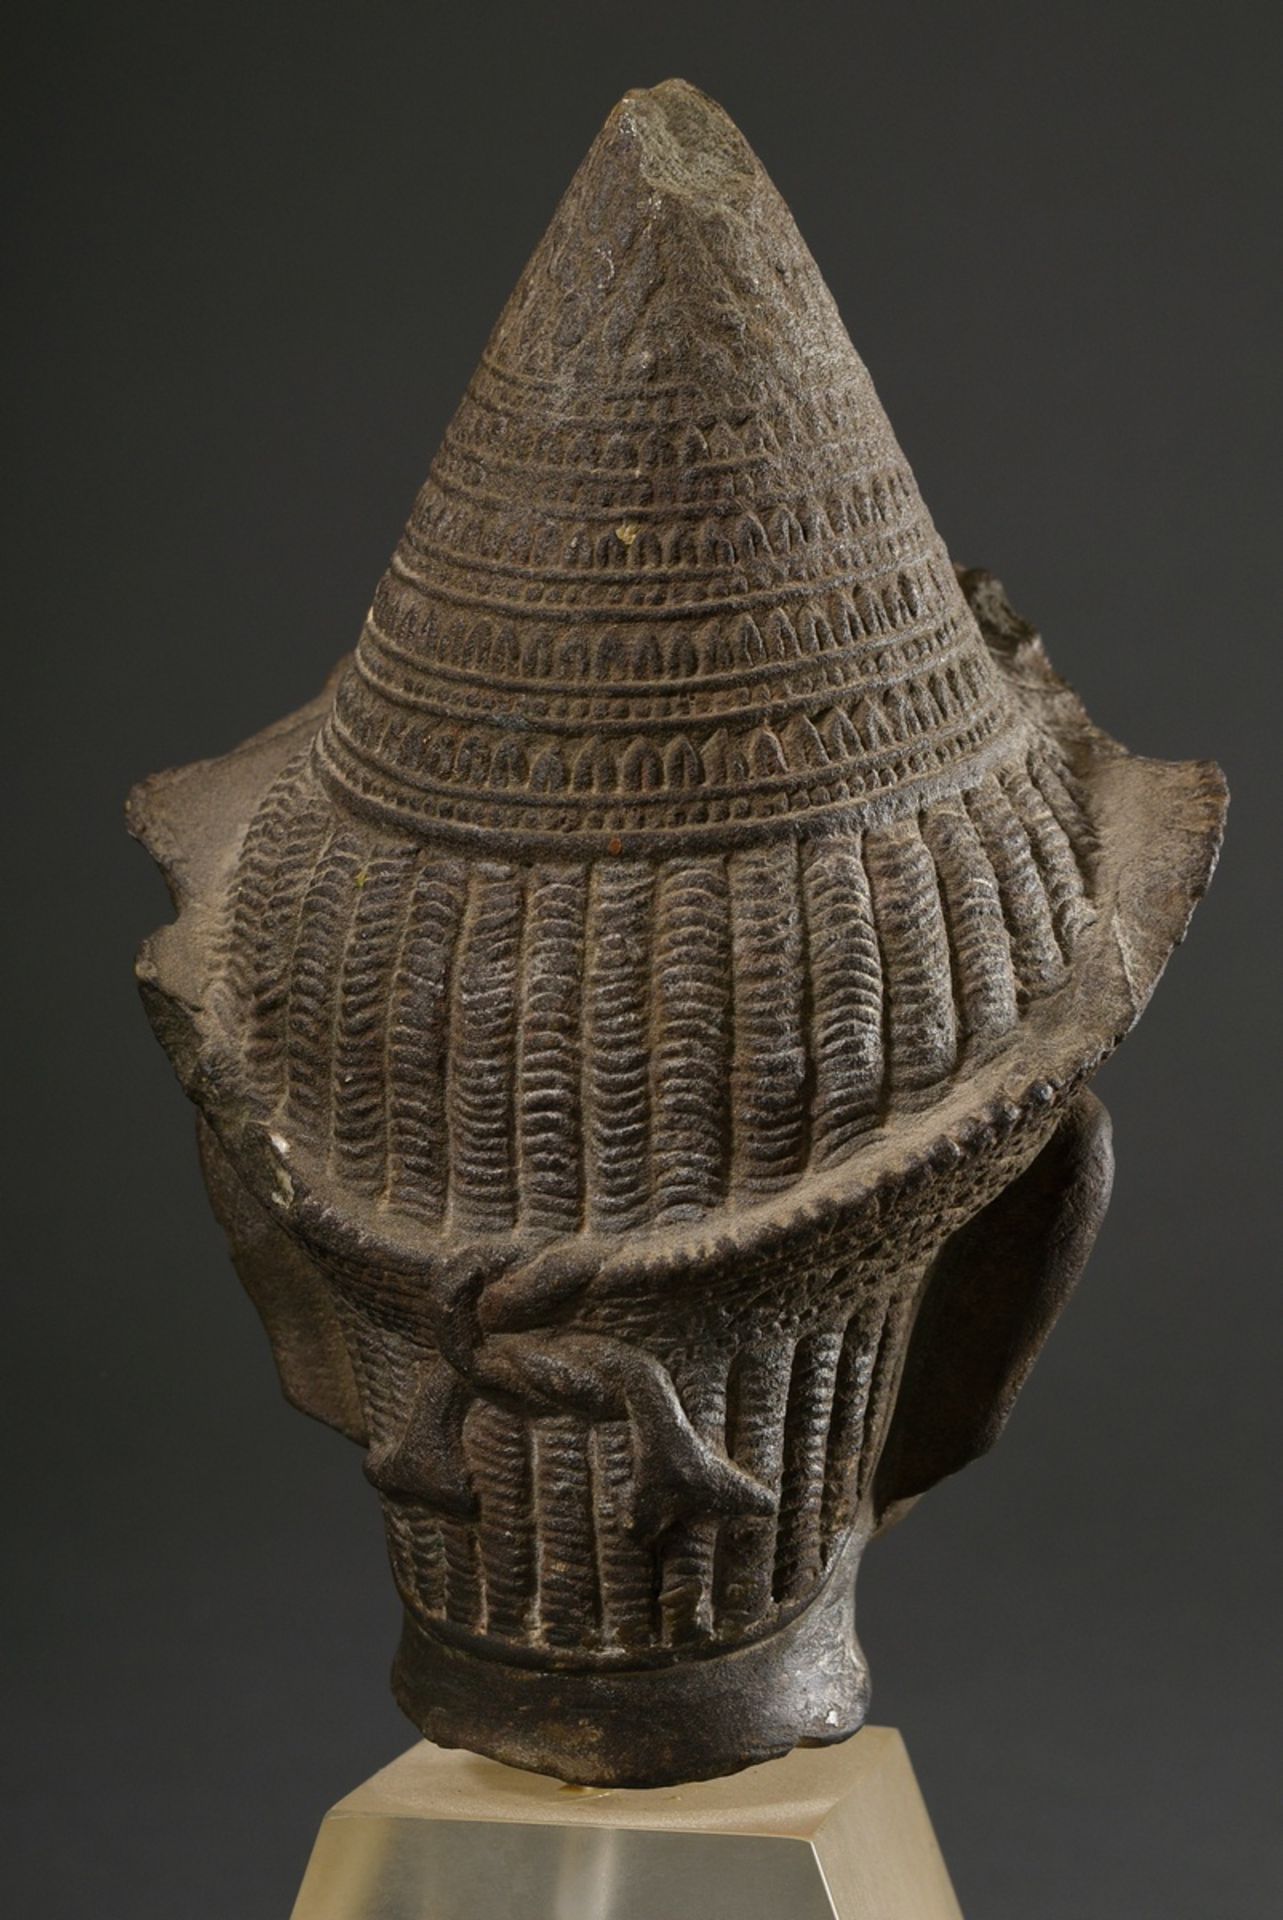 Excellent Khmer sandstone head "Vishnu" with conical chignon (mukuta) and laced diadem, finely work - Image 5 of 5